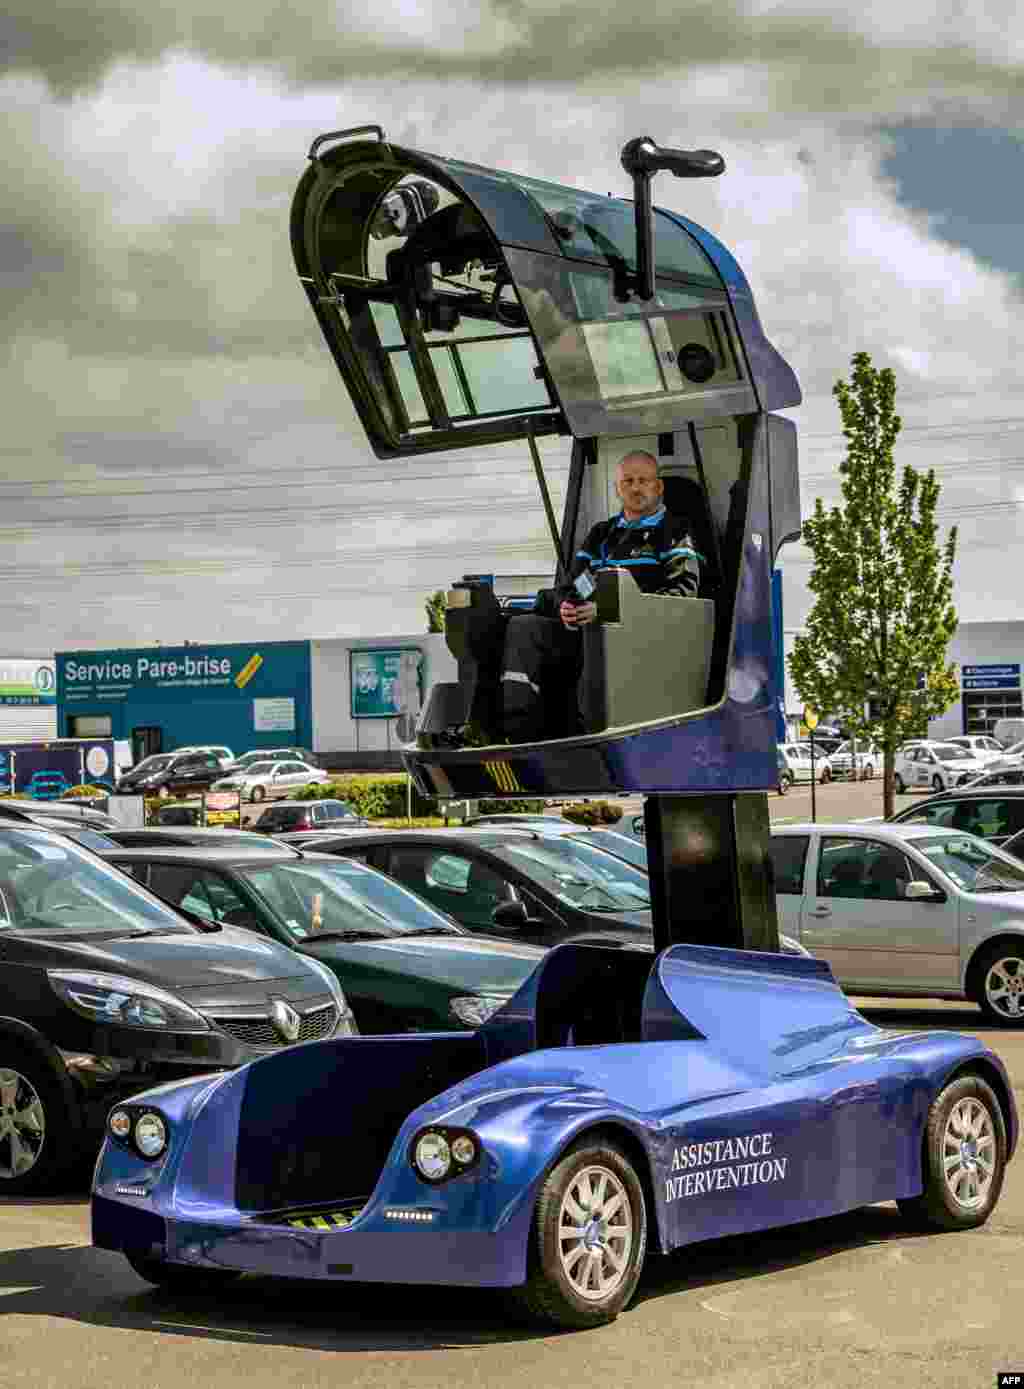 A man drives the &quot;Iris viseo&quot;, an electric surveillance vehicle with a telescopic cockpit designed and manufactured in France at the car park of a shopping center in Noyelles-Godault.